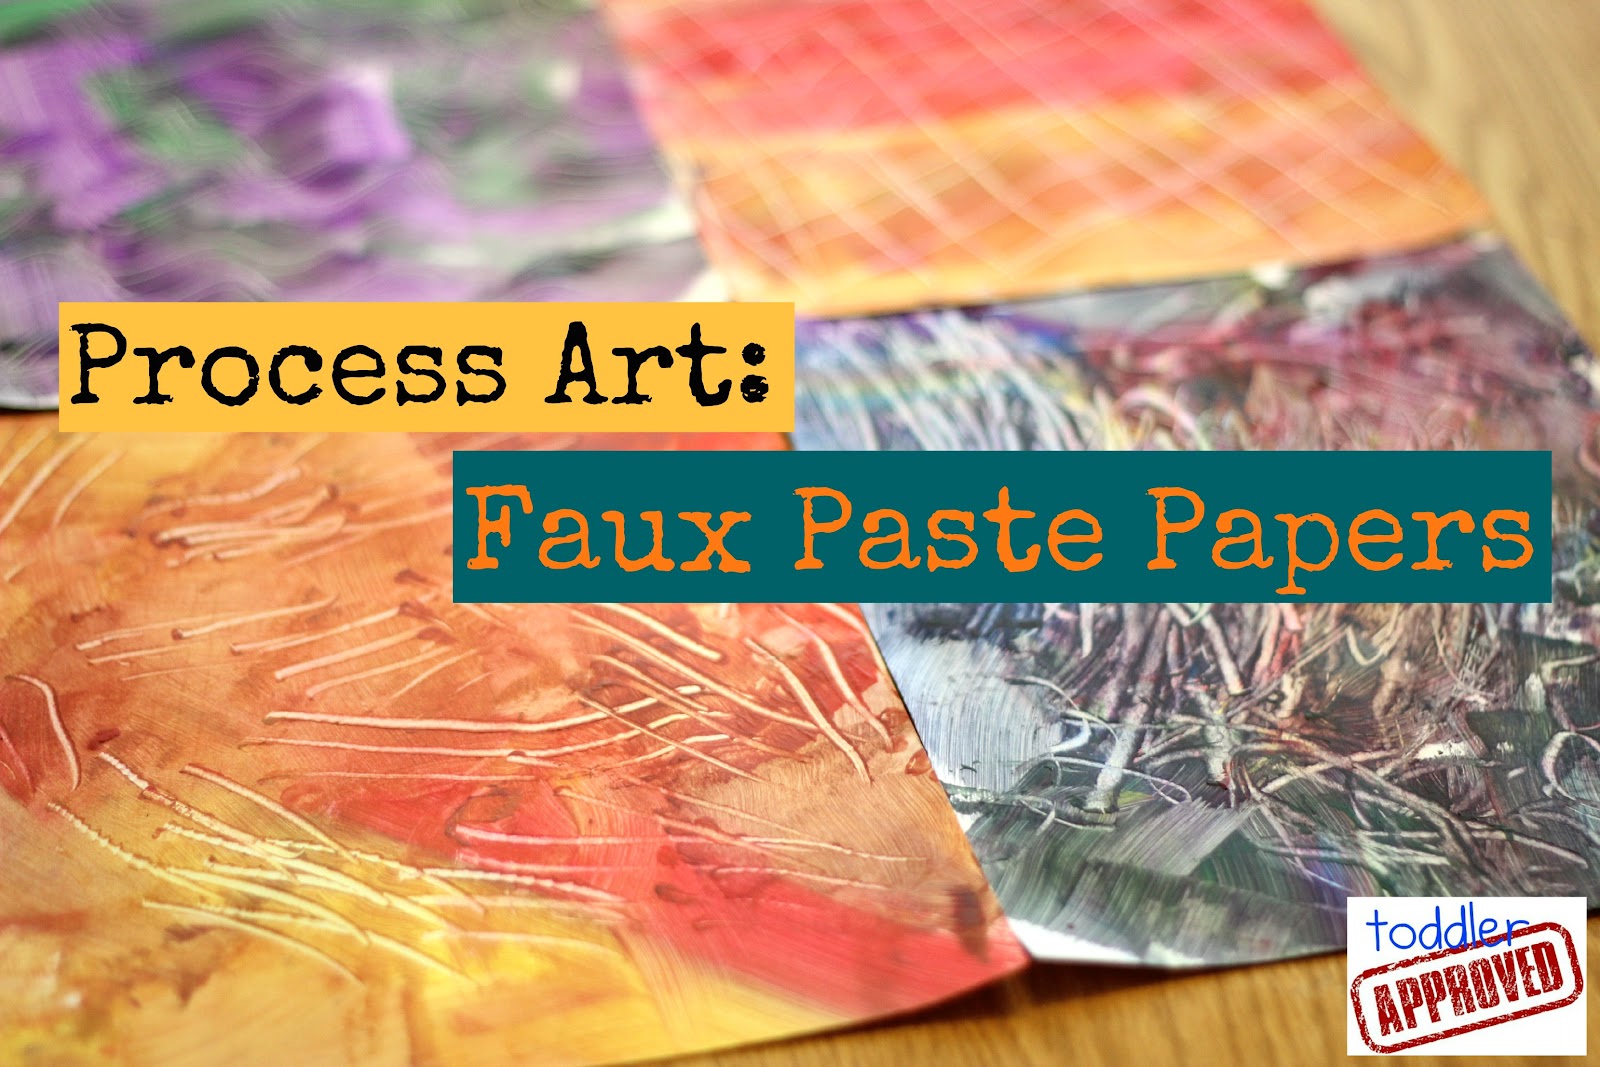 toddler approved process art faux paste papers wallpaper paste anyone